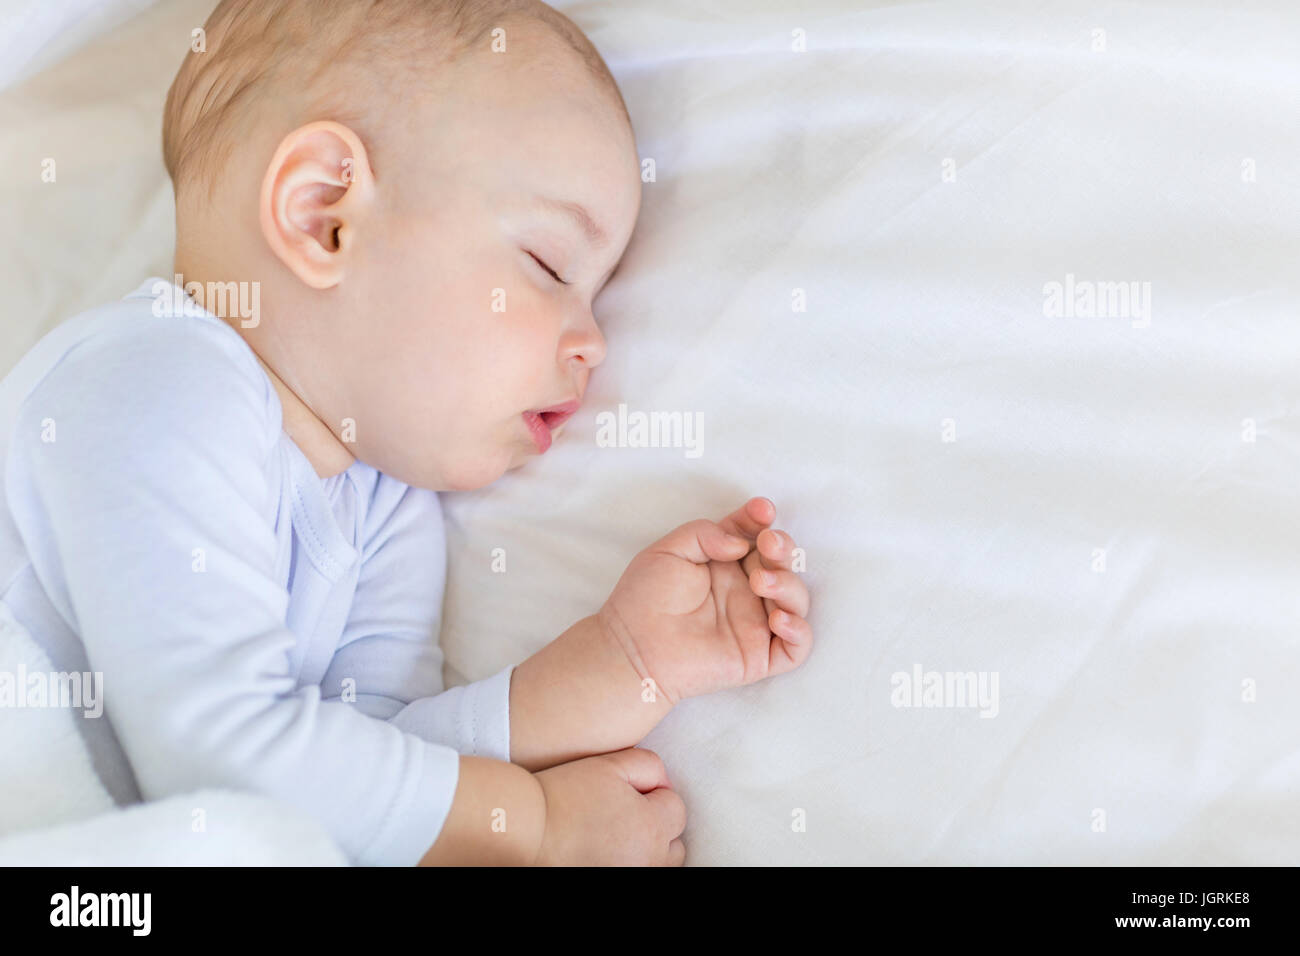 Close-up portrait of adorable baby boy sleeping in bed, 1 year old baby concept Stock Photo